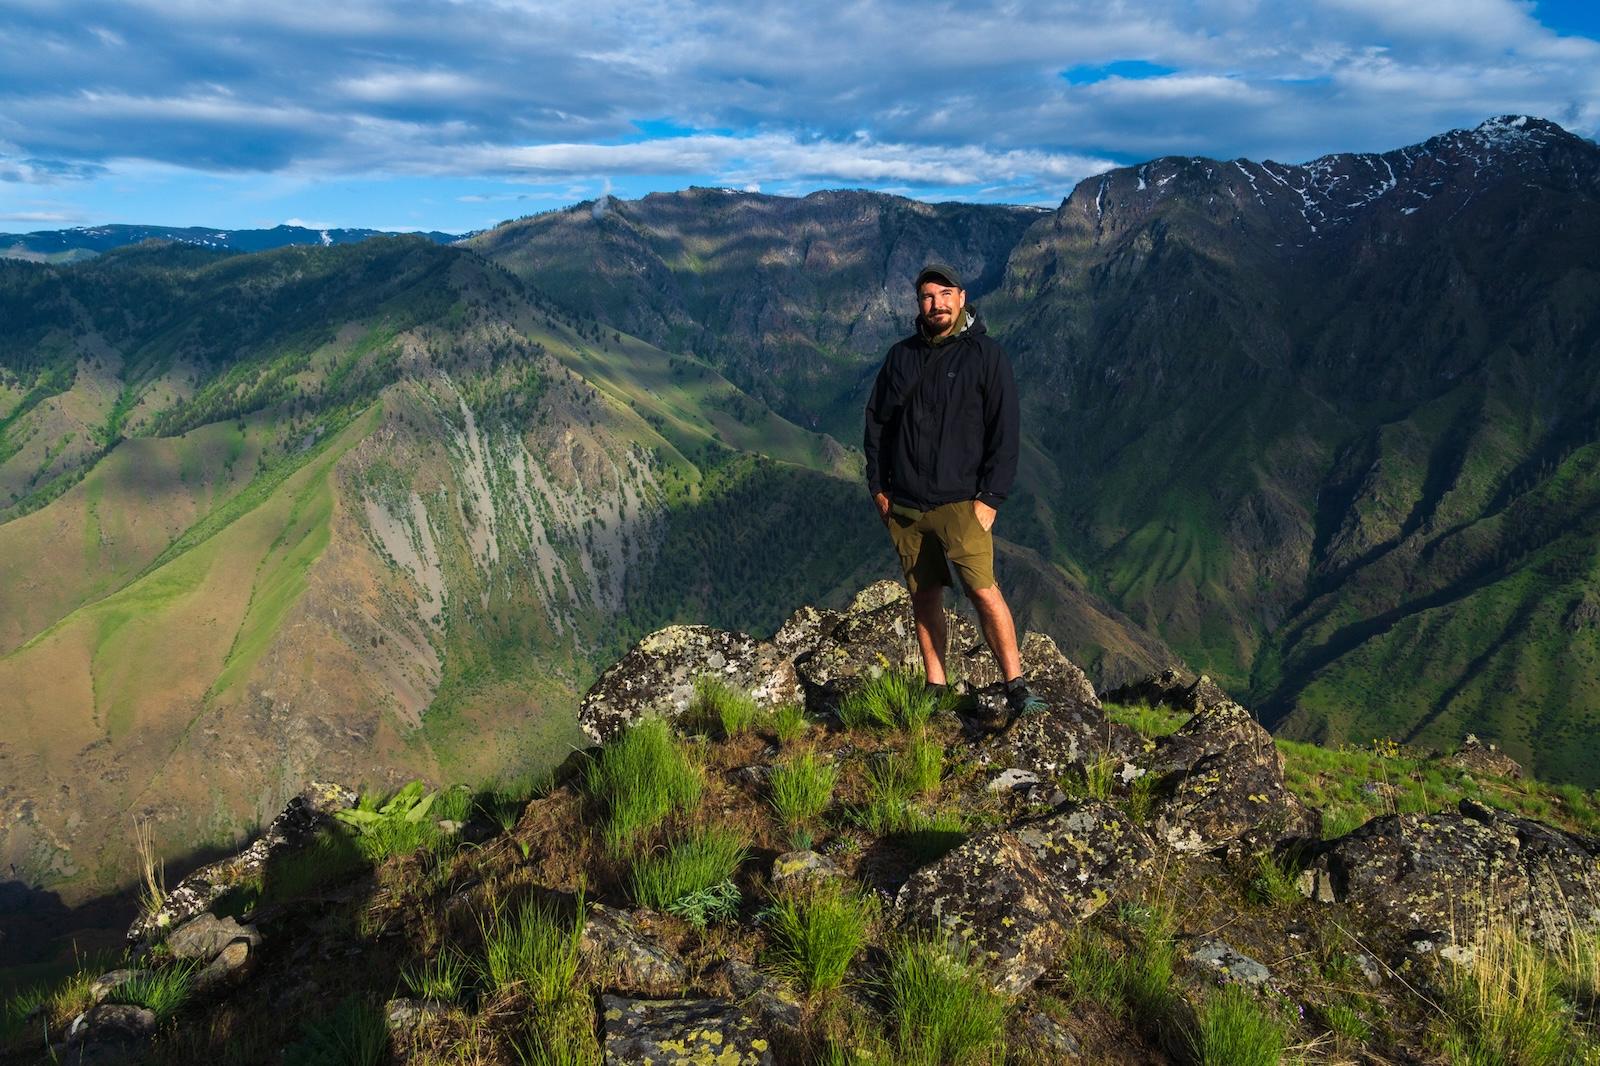 Brock Dallman at a scenic viewpoint in Hells Canyon